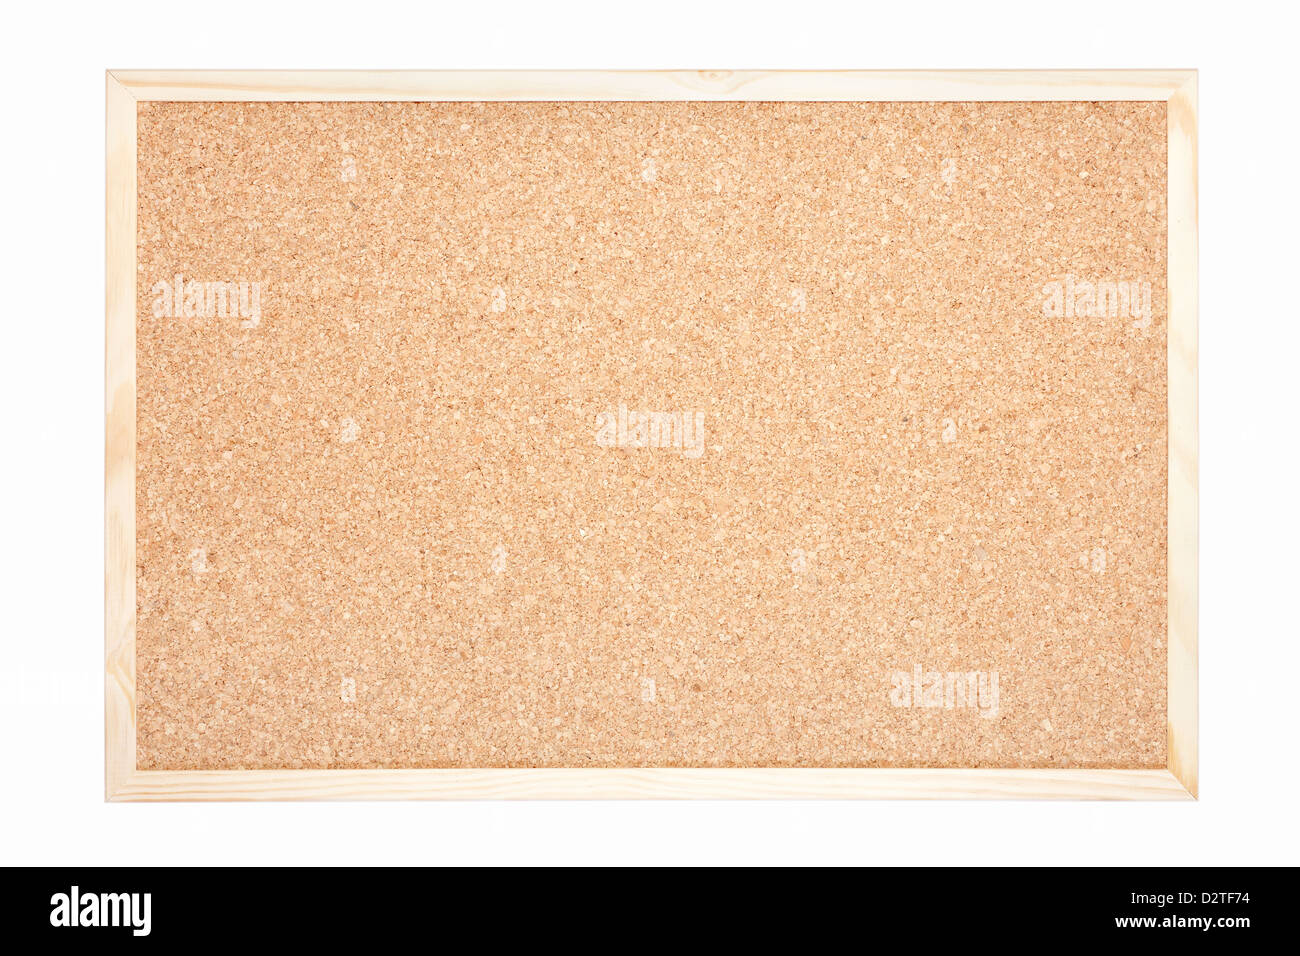 Blank cork board with wooden frame on white Stock Photo